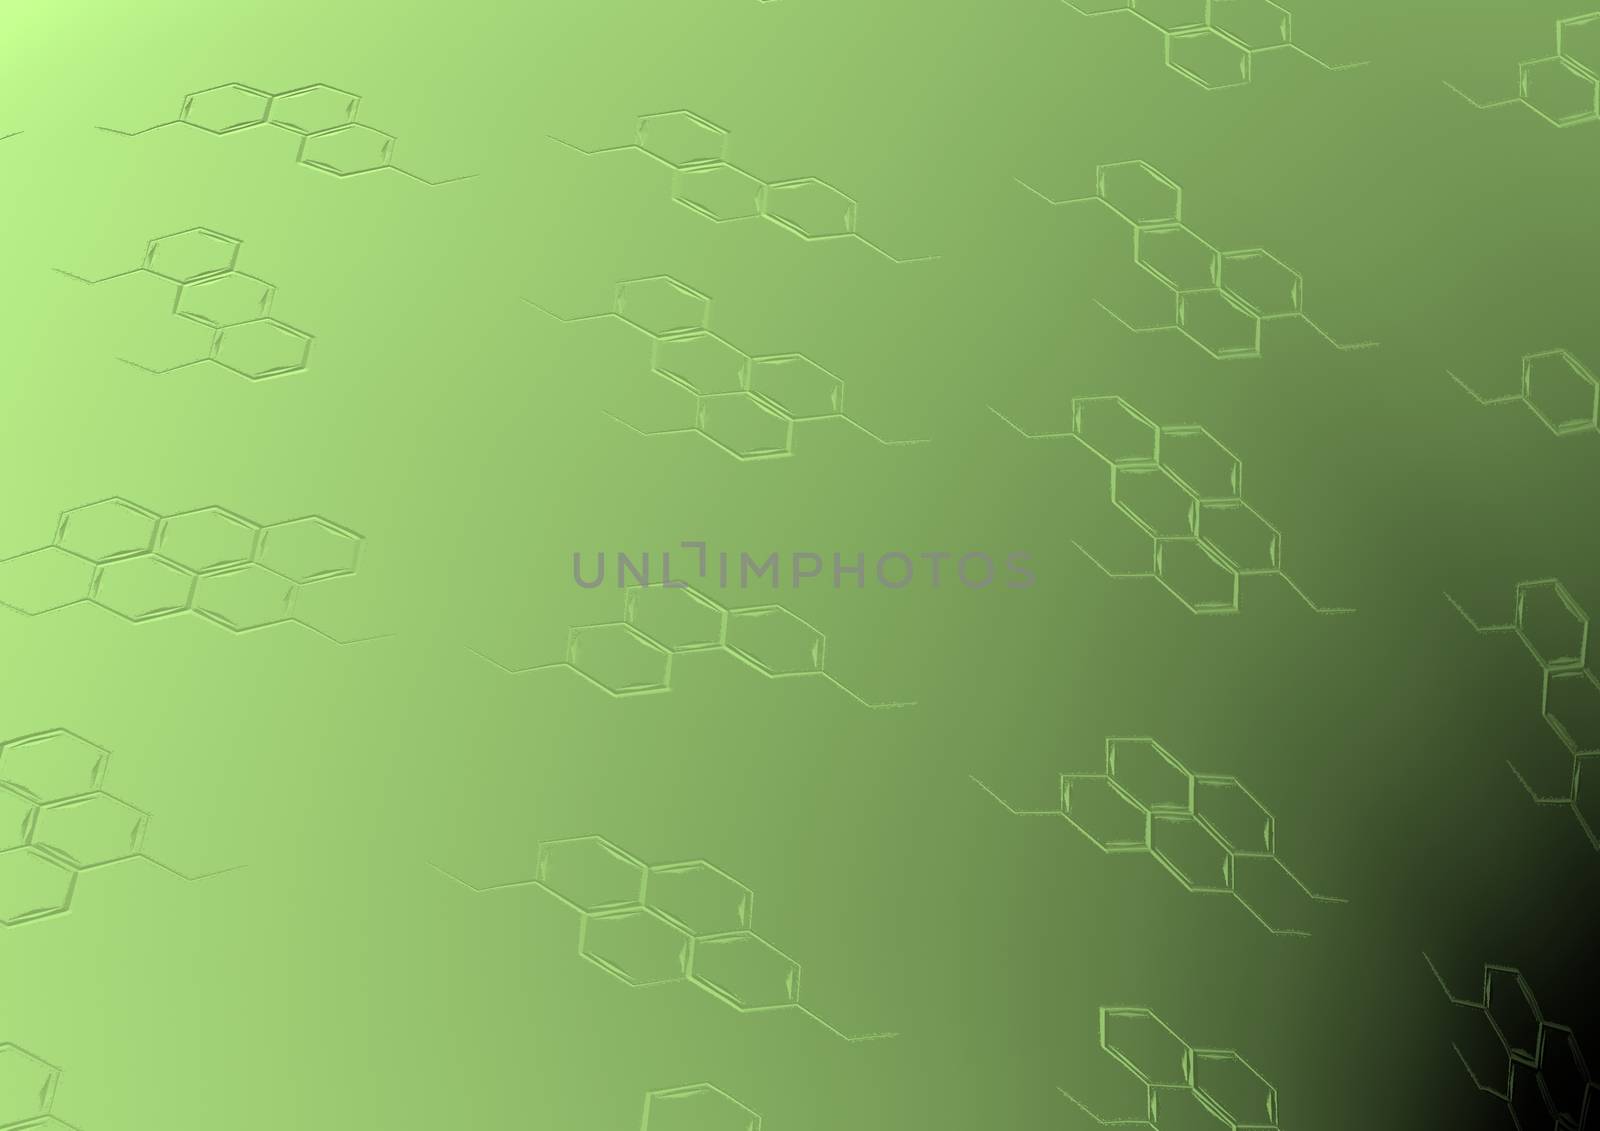 Background with structural chemical formulas. Concept of a chemical background.